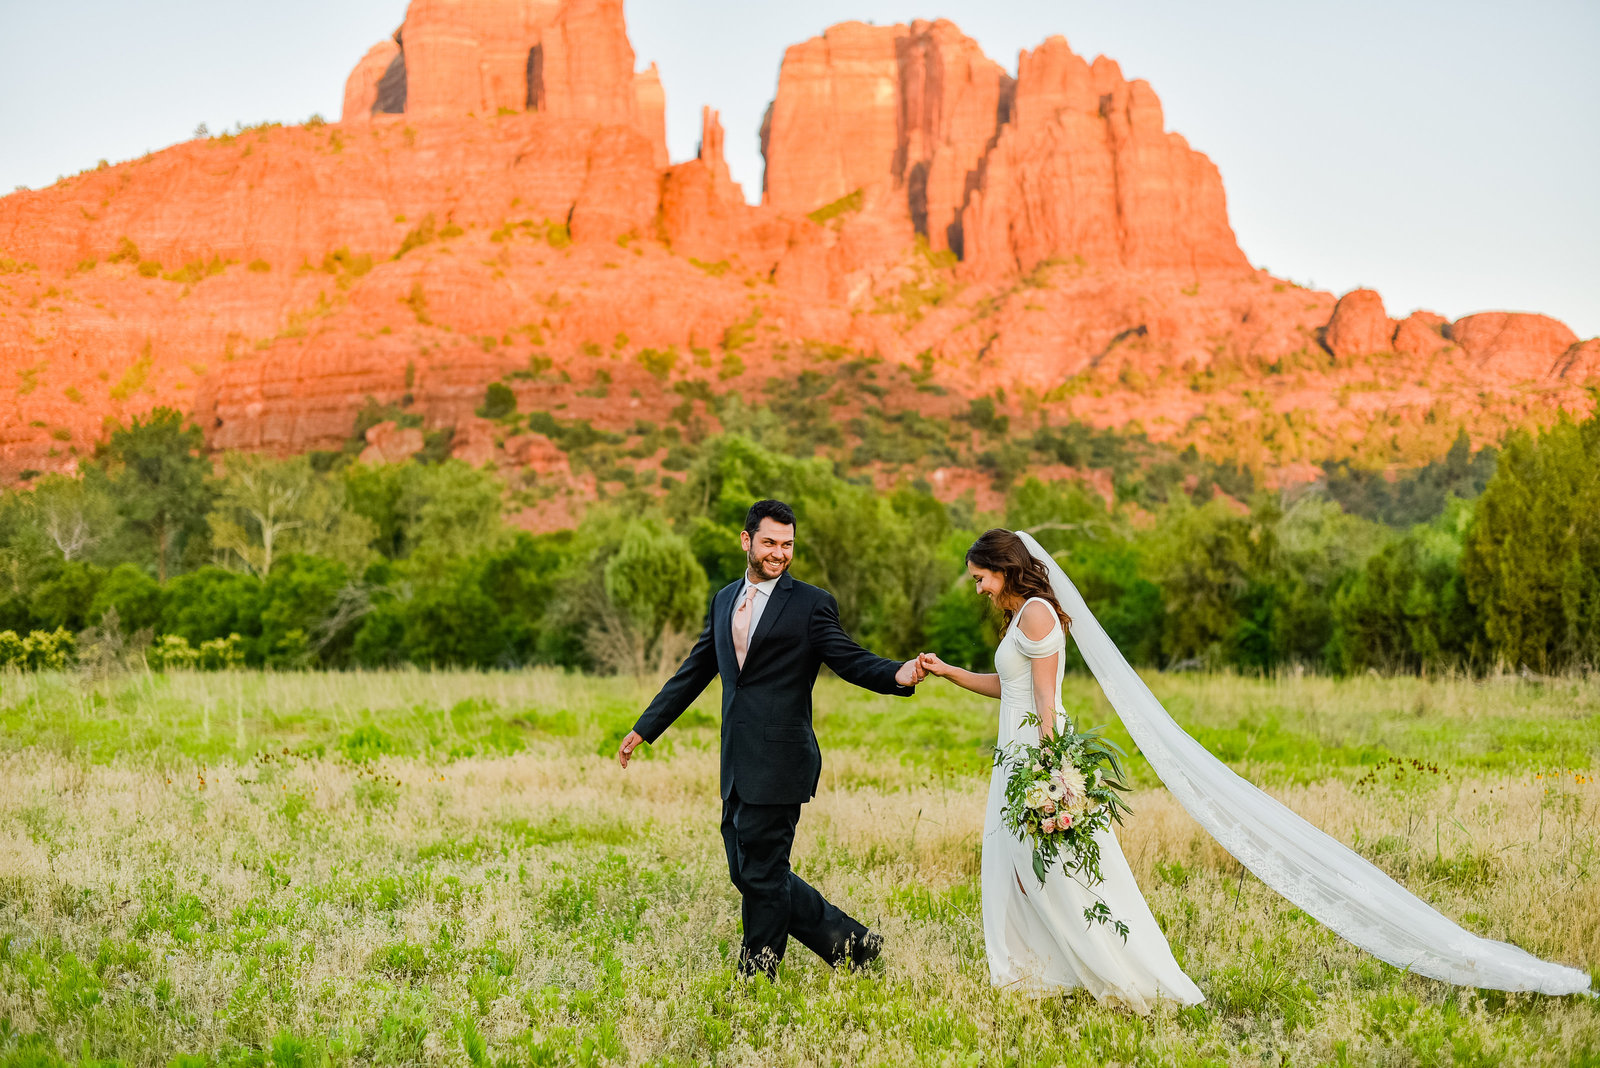 Sedona Crescent Moon Ranch wedding couple bride and groom walking in green field Cathedral Rock behind